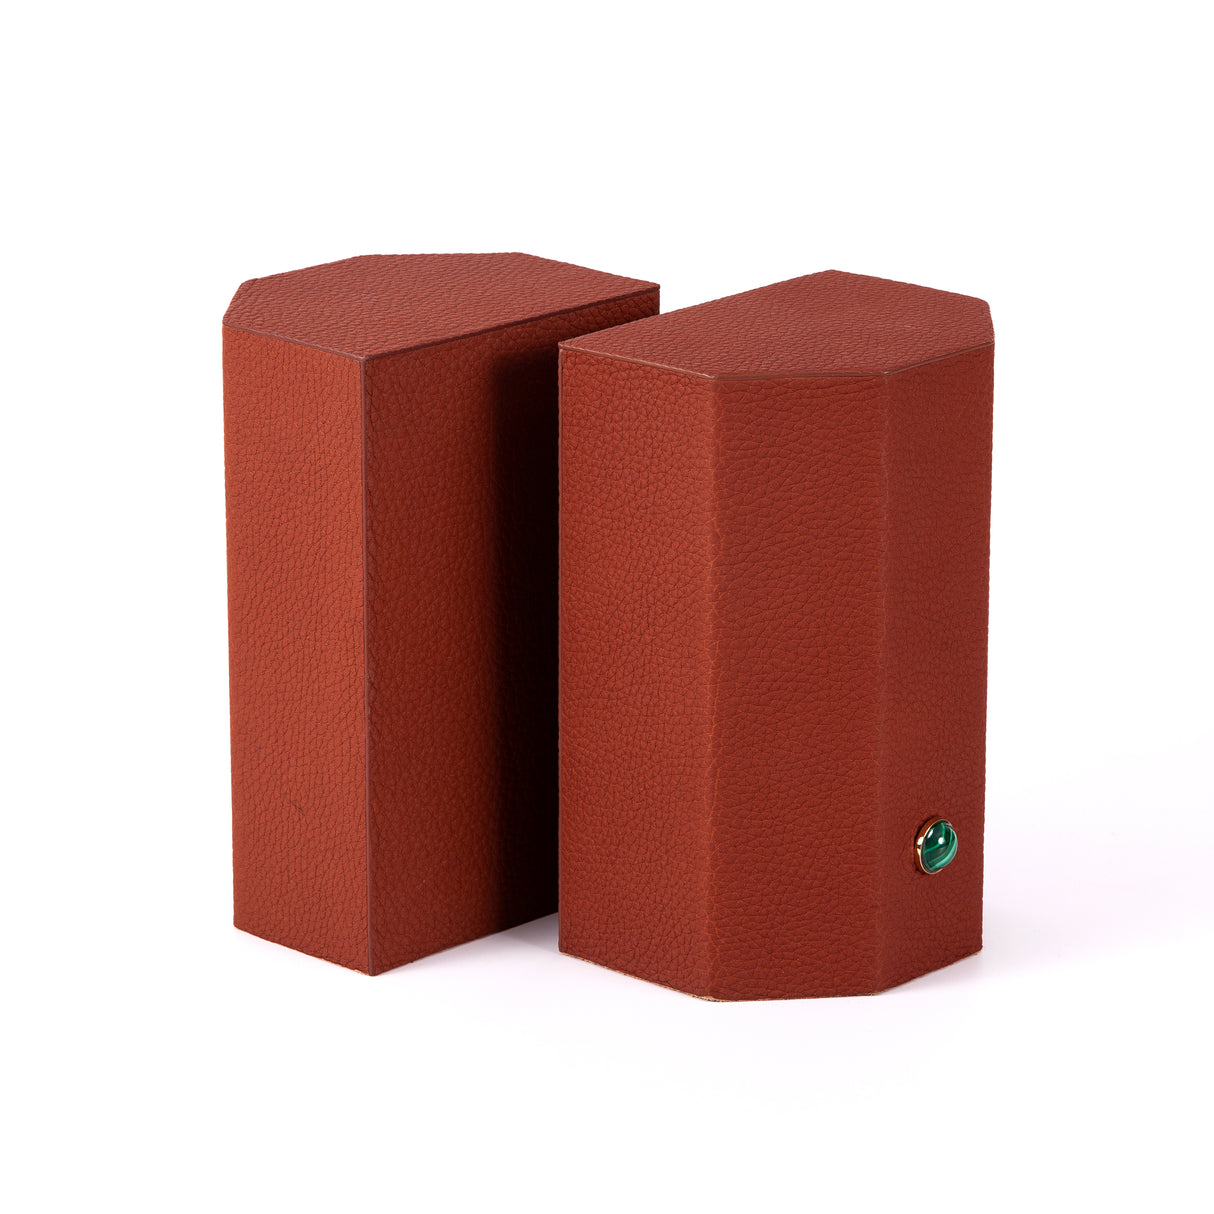 Timeless and tasteful bookends to add color to any library.  Solid geometric blocks of wood covered in leather are the essential jewels on a bookshelf.    Coordinate your bookends to match the decoration of the room.  %100 Leather (Floater leather)   Jeweled with natural malachite stones